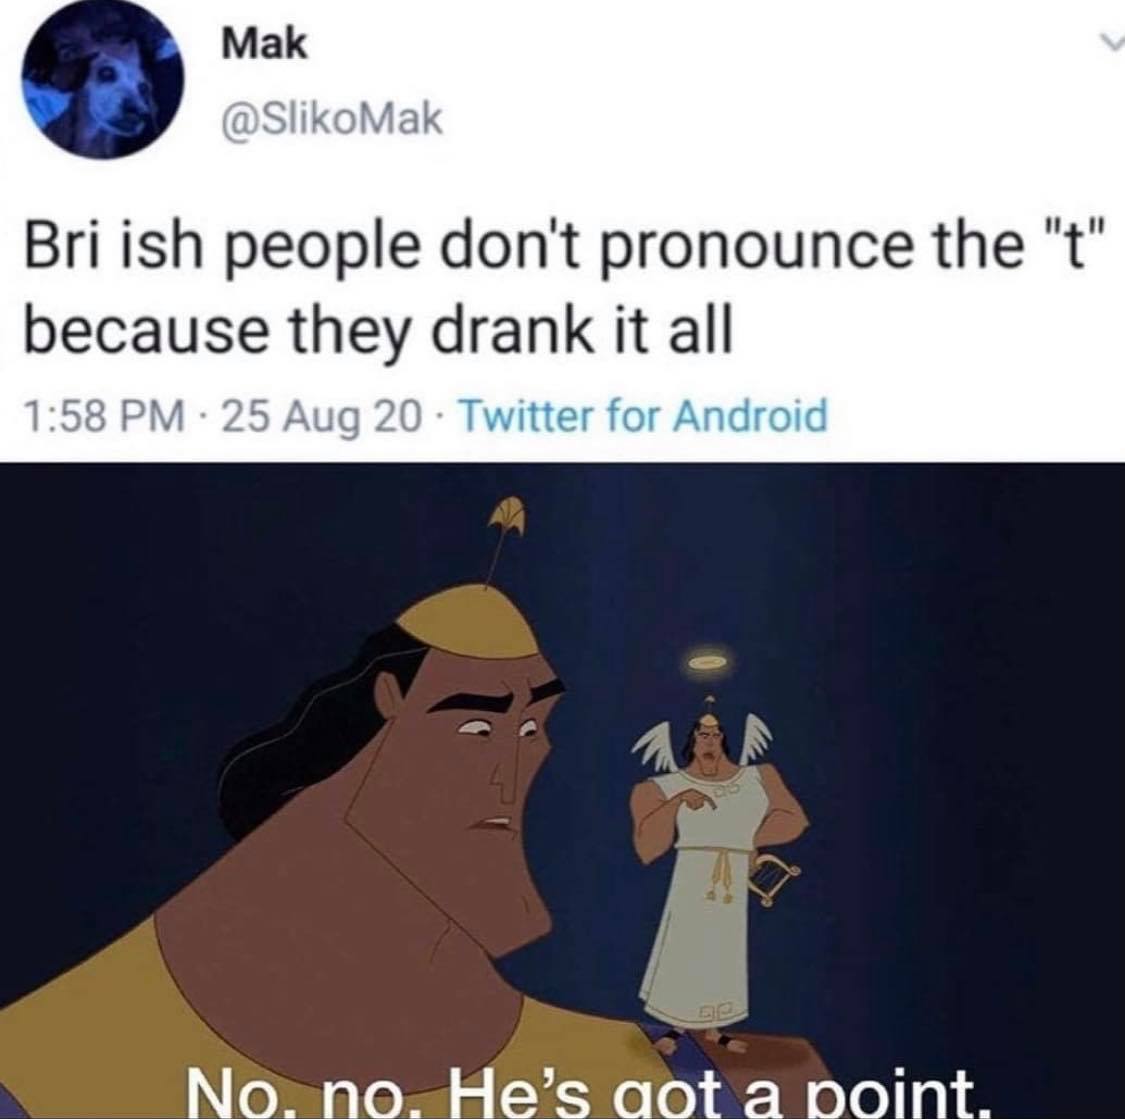 bri ish people dont pronounce the t - Mak Bri ish people don't pronounce the "t" because they drank it all 25 Aug 20 Twitter for Android No, no. He's got a point.